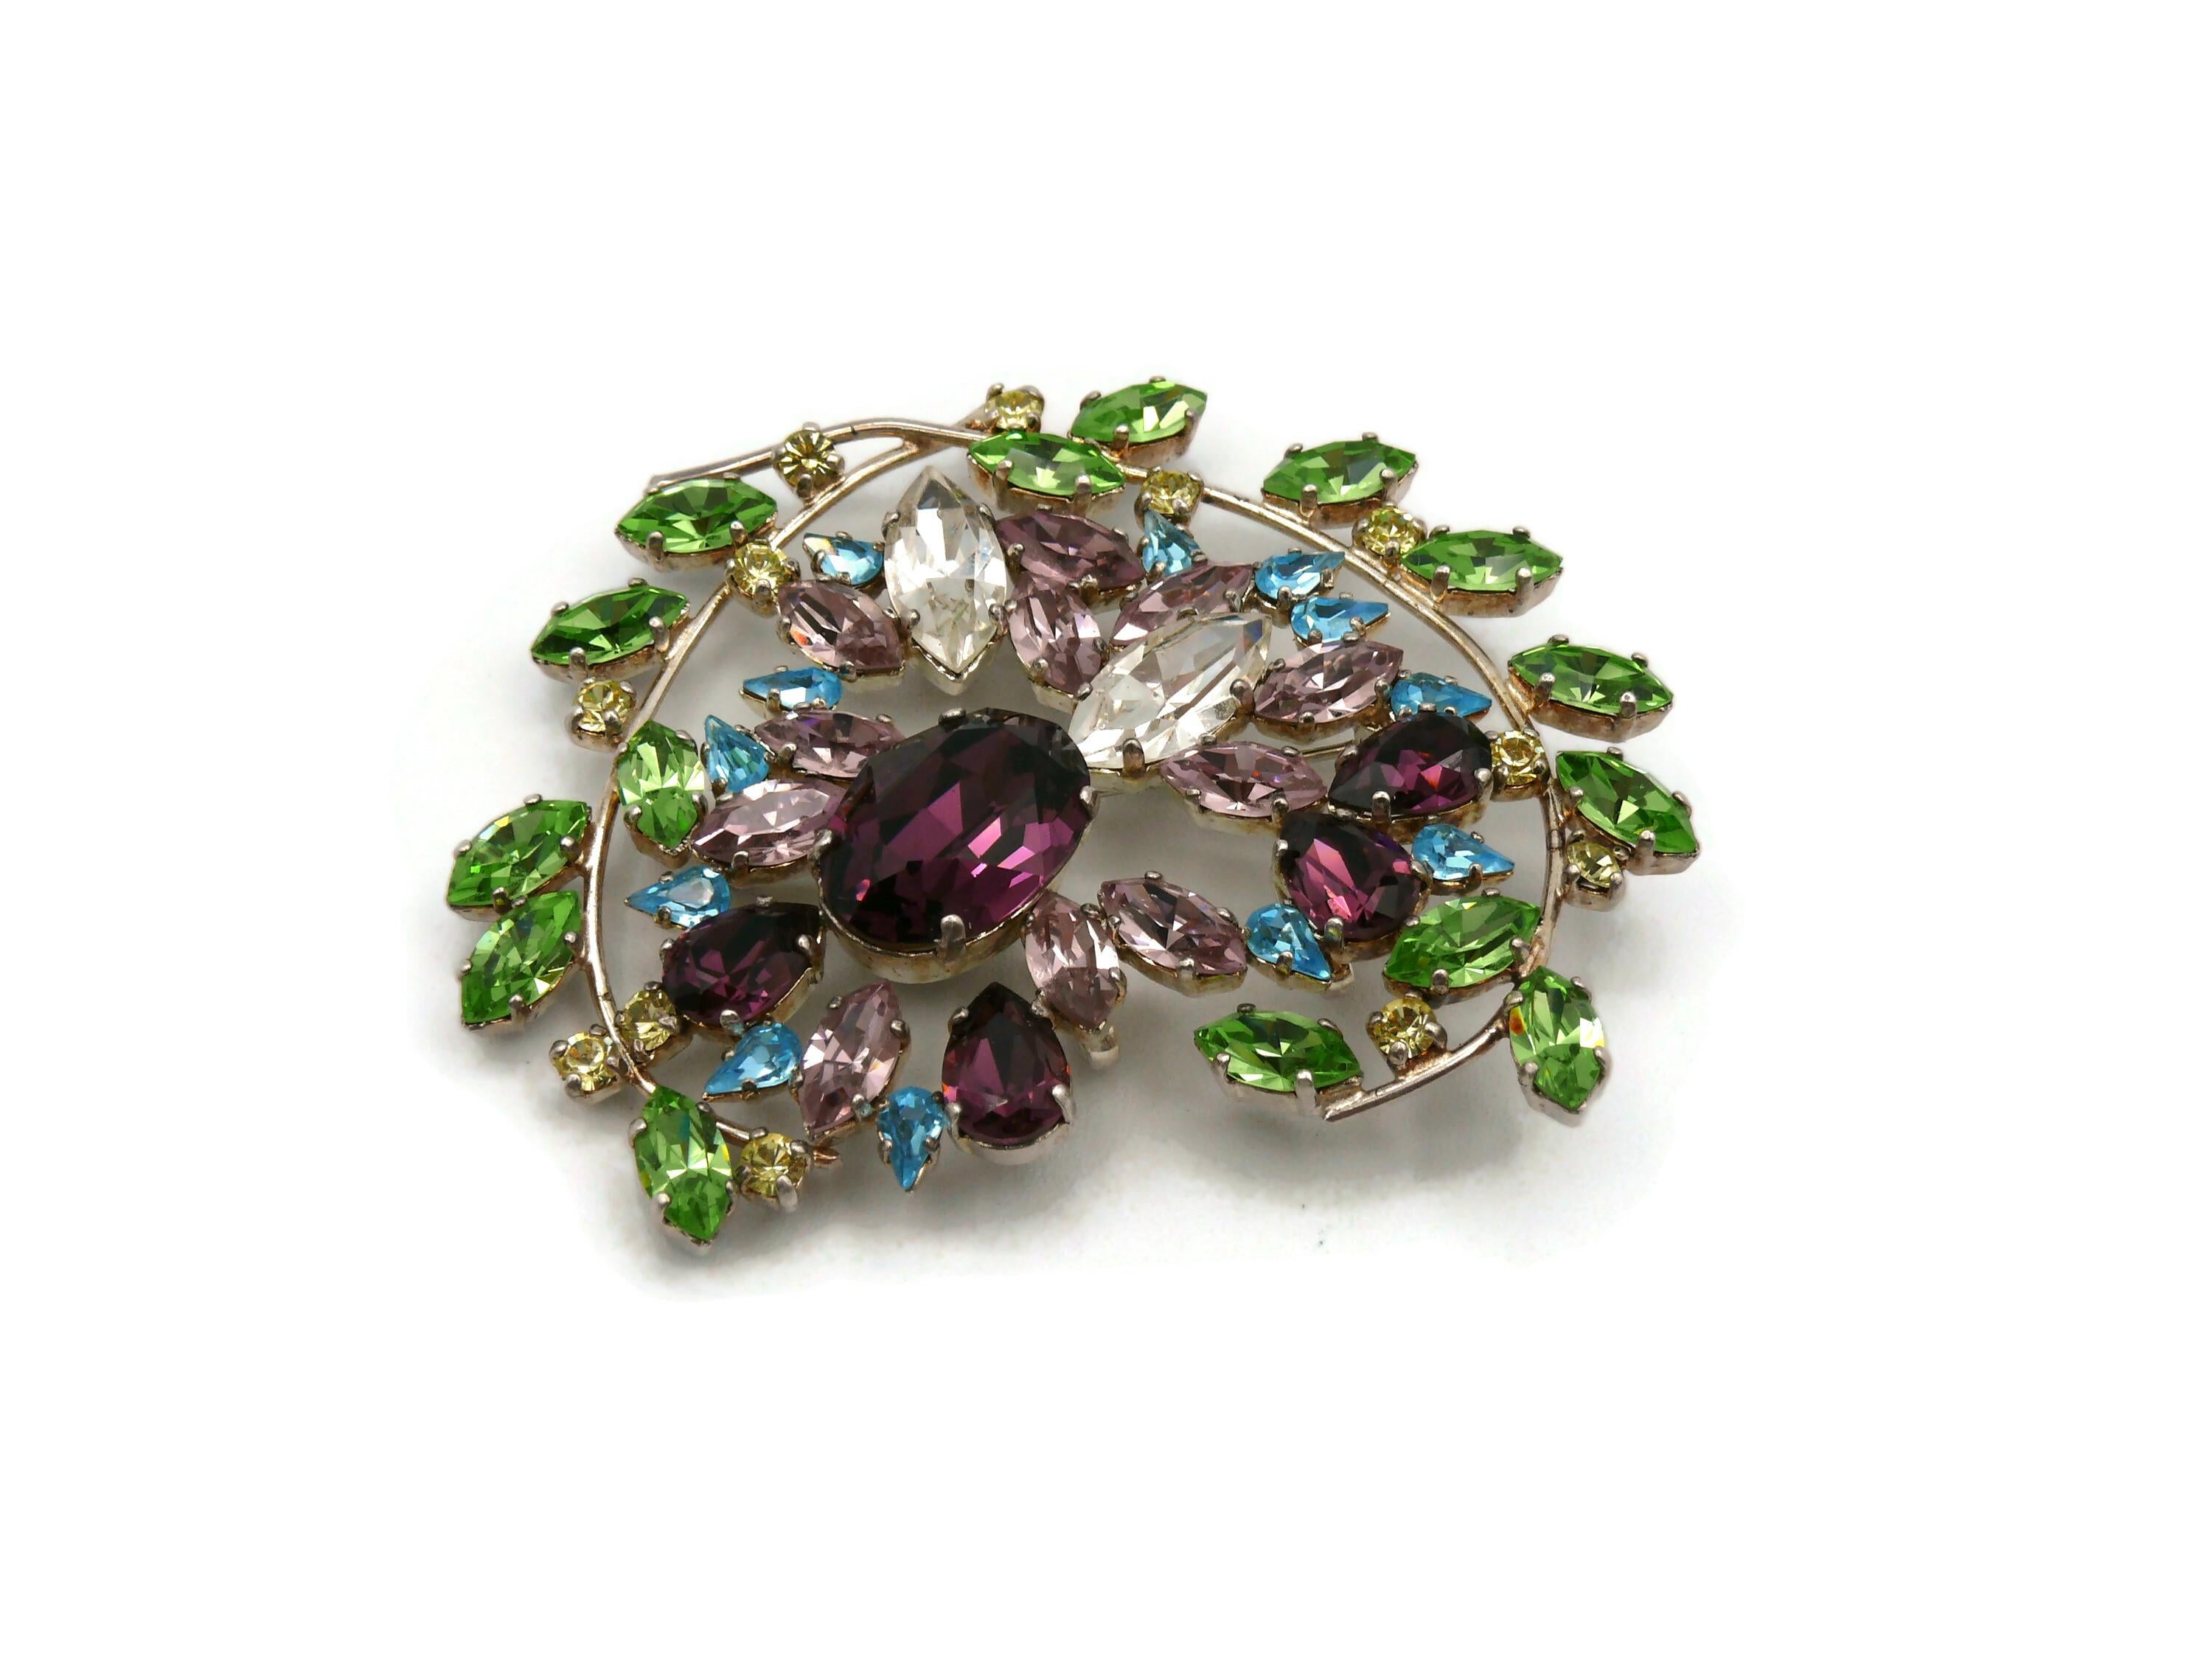 CHRISTIAN LACROIX Vintage Jewelled Heart Brooch Pendant For Sale 4